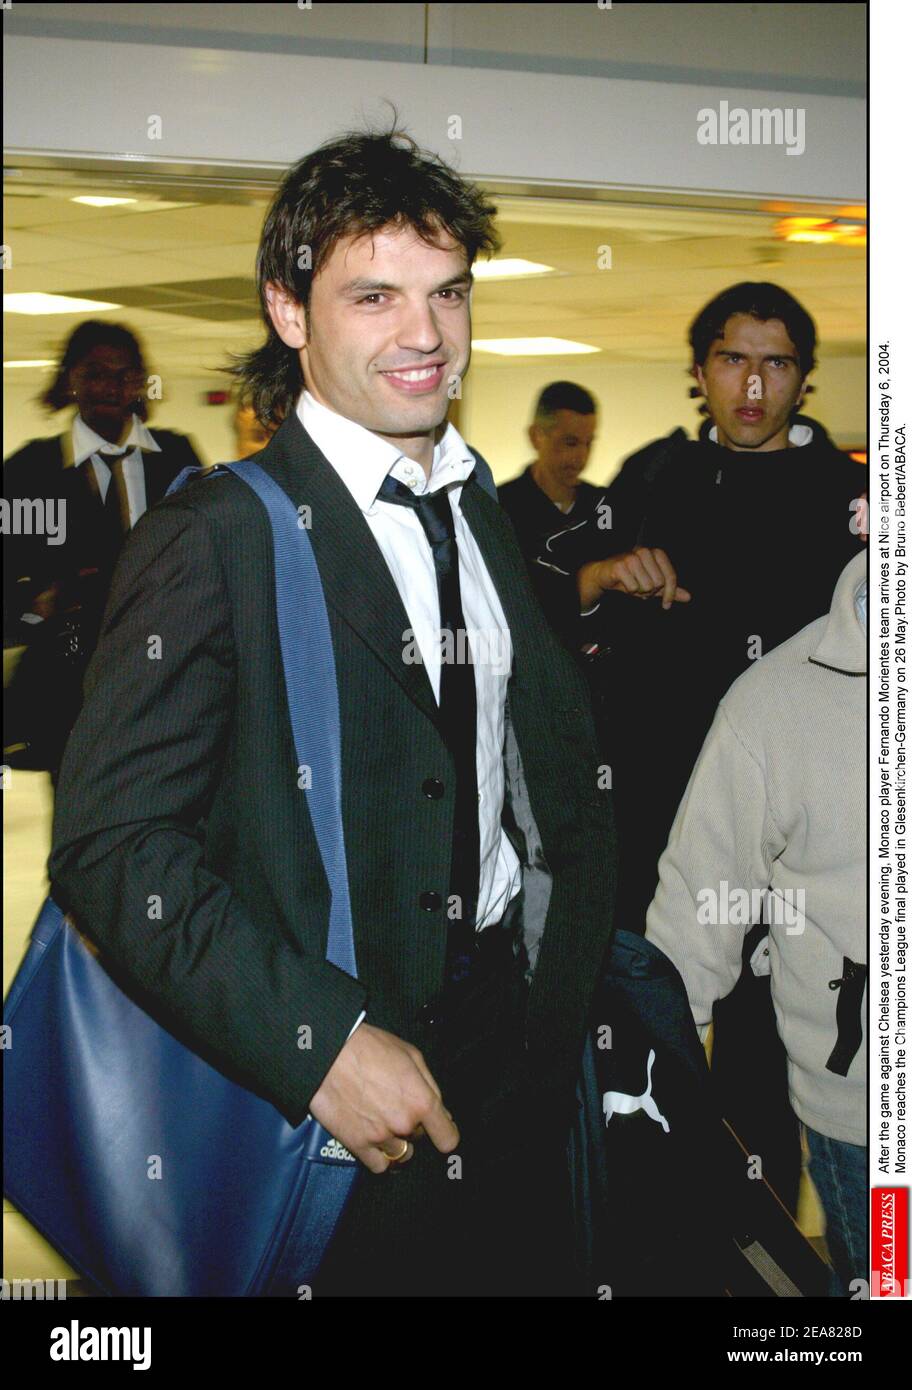 After the game against Chelsea yesterday evening, Monaco player Fernando Morientes team arrives at Nice airport on Thursday 6, 2004. Monaco reaches the Champions League final played in Glesenkirchen-Germany on 26 May.Photo by Bruno Bebert/ABACA. Stock Photo